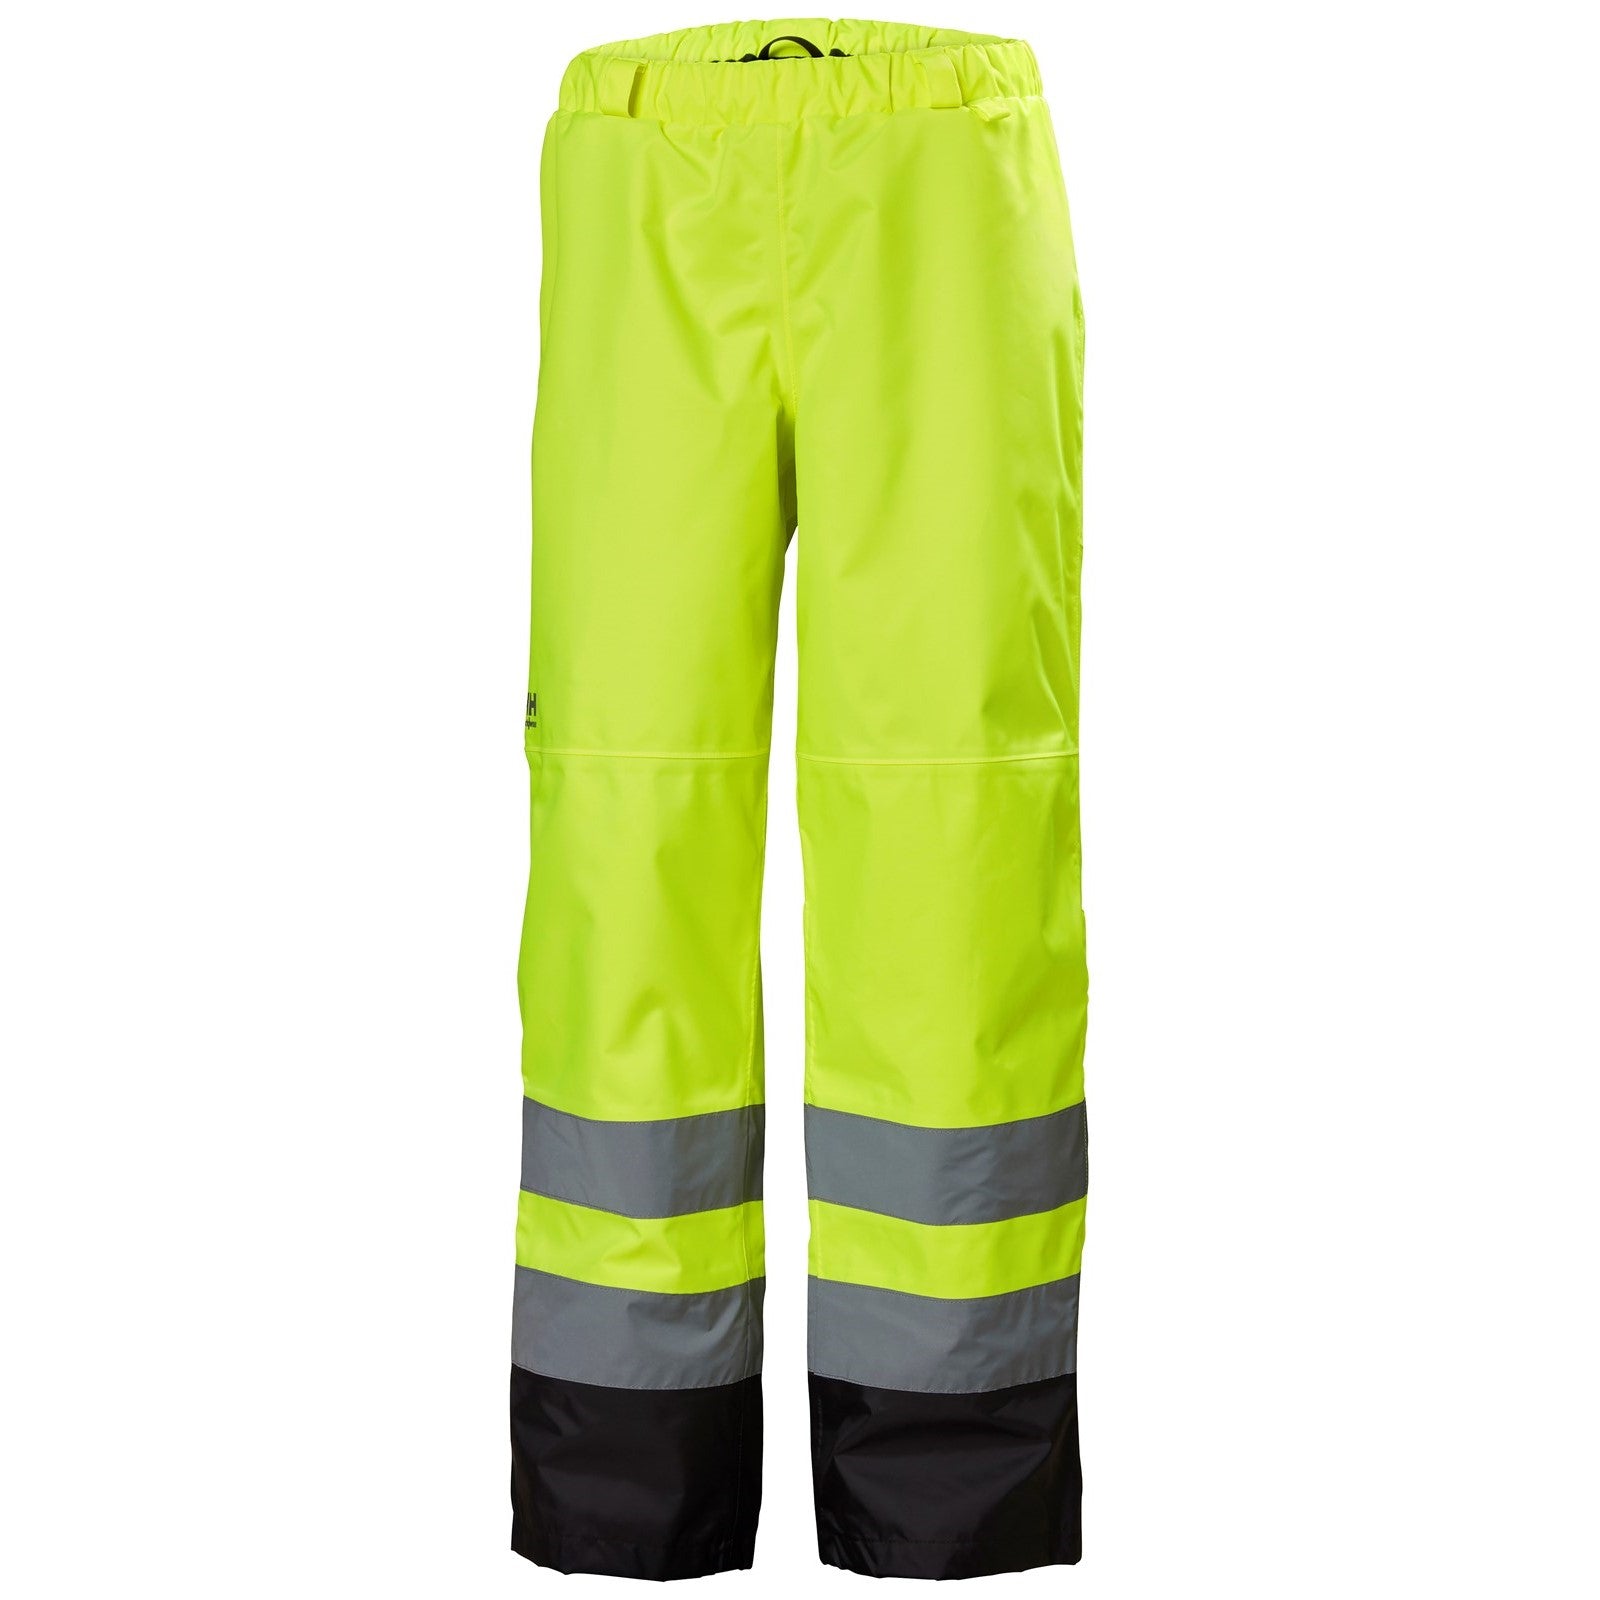 Helly Hansen Alta waterproof high-visibility yellow/charcoal trouser